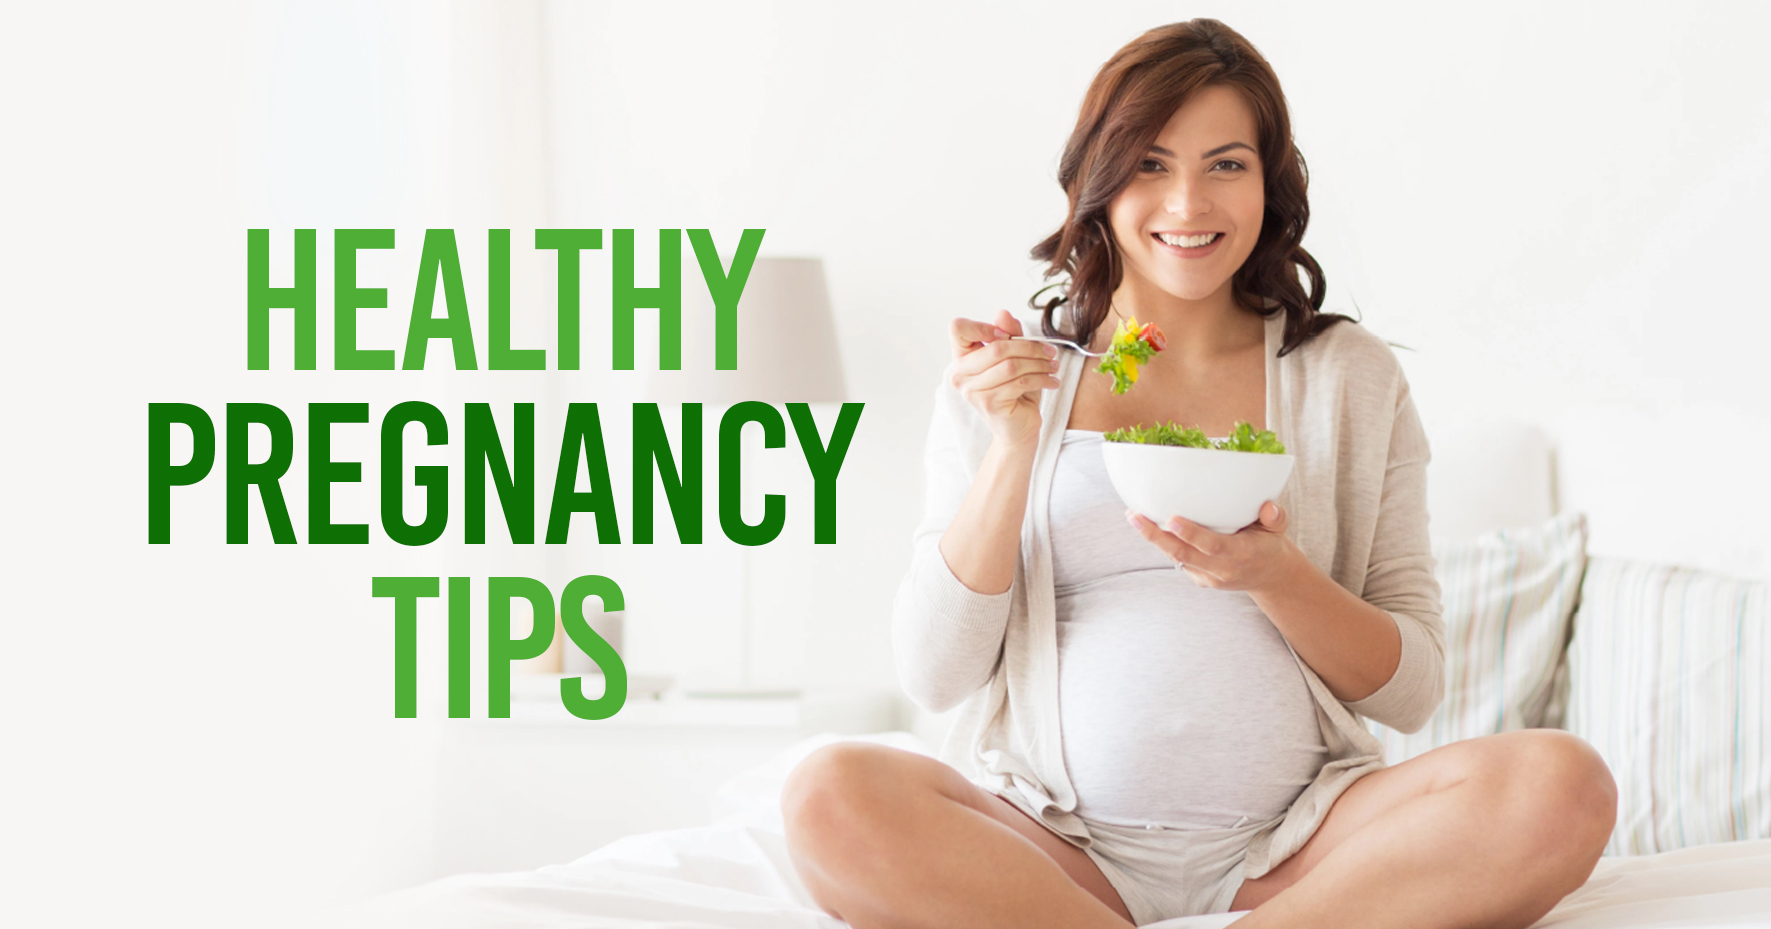 Tips for Healthy Pregnancy - A Quick Guide